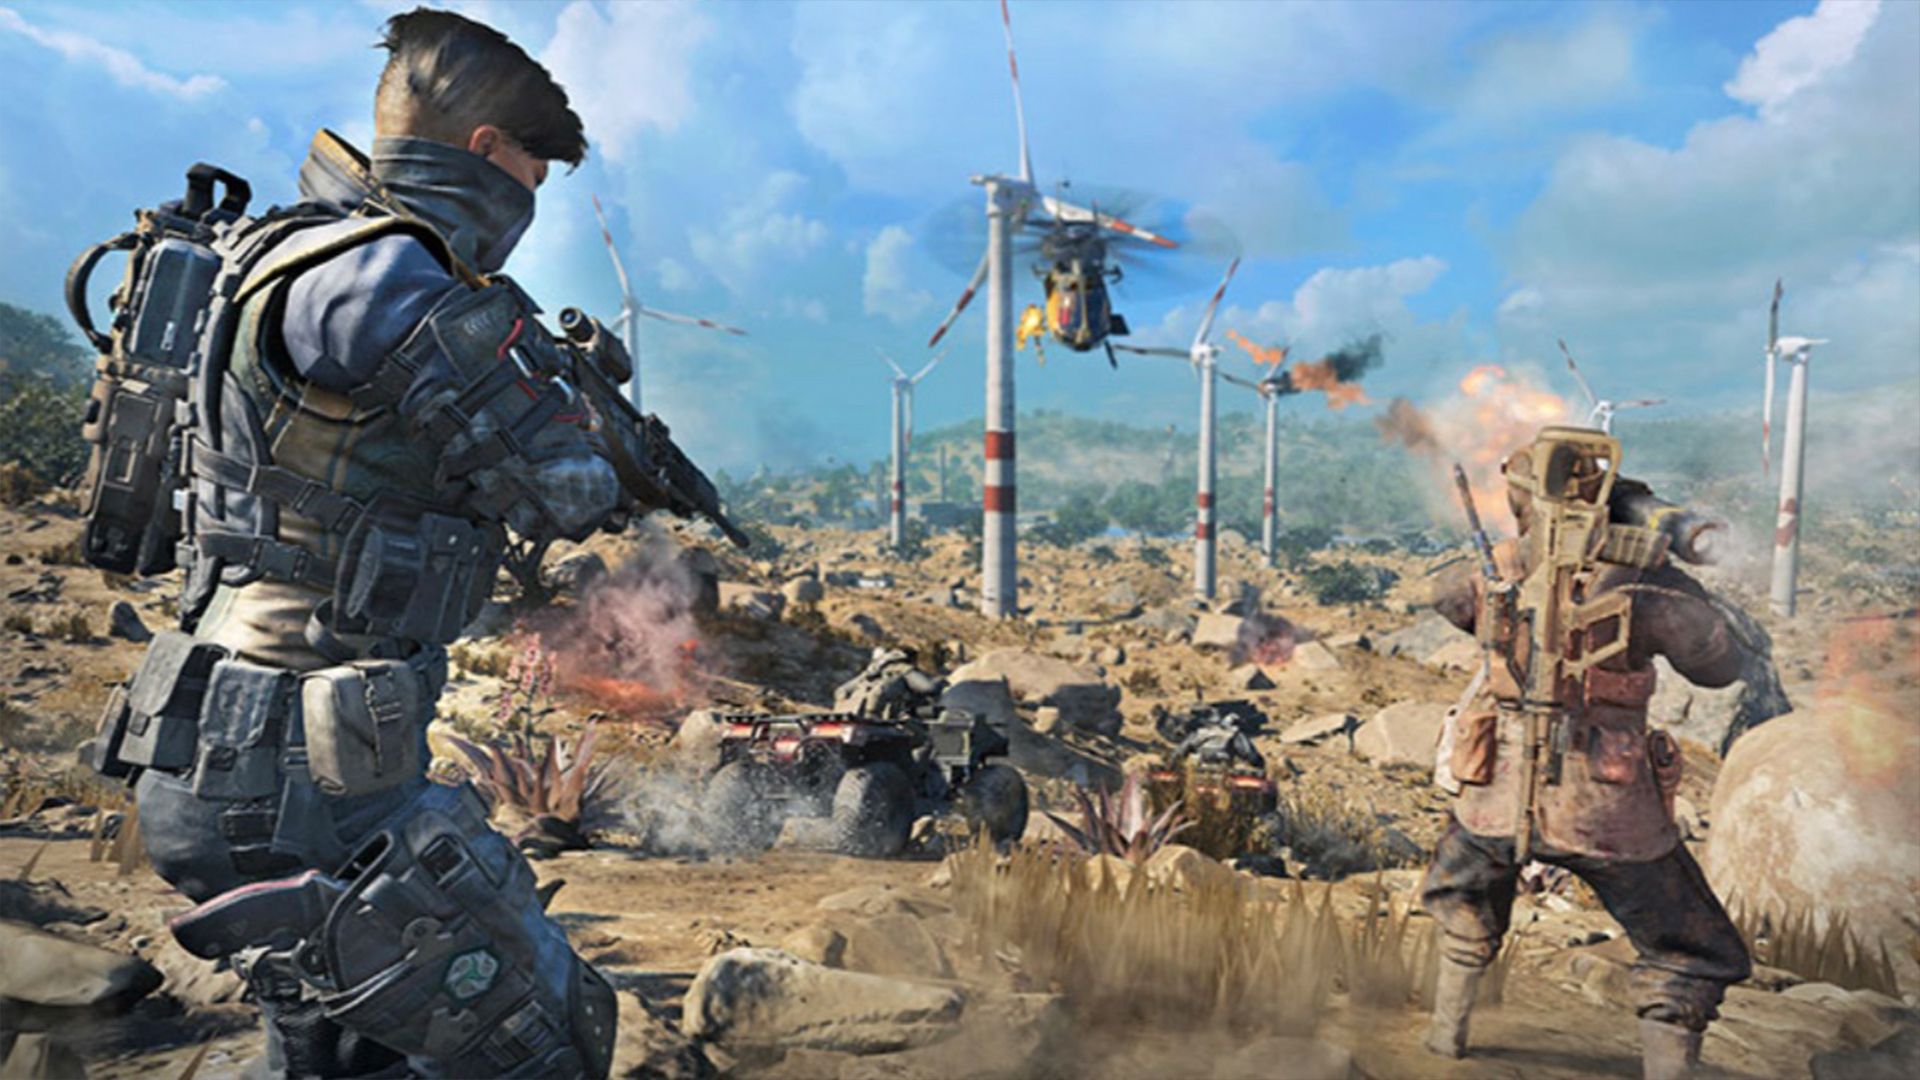 Call of Duty's Blackout battle royale mode is free for April